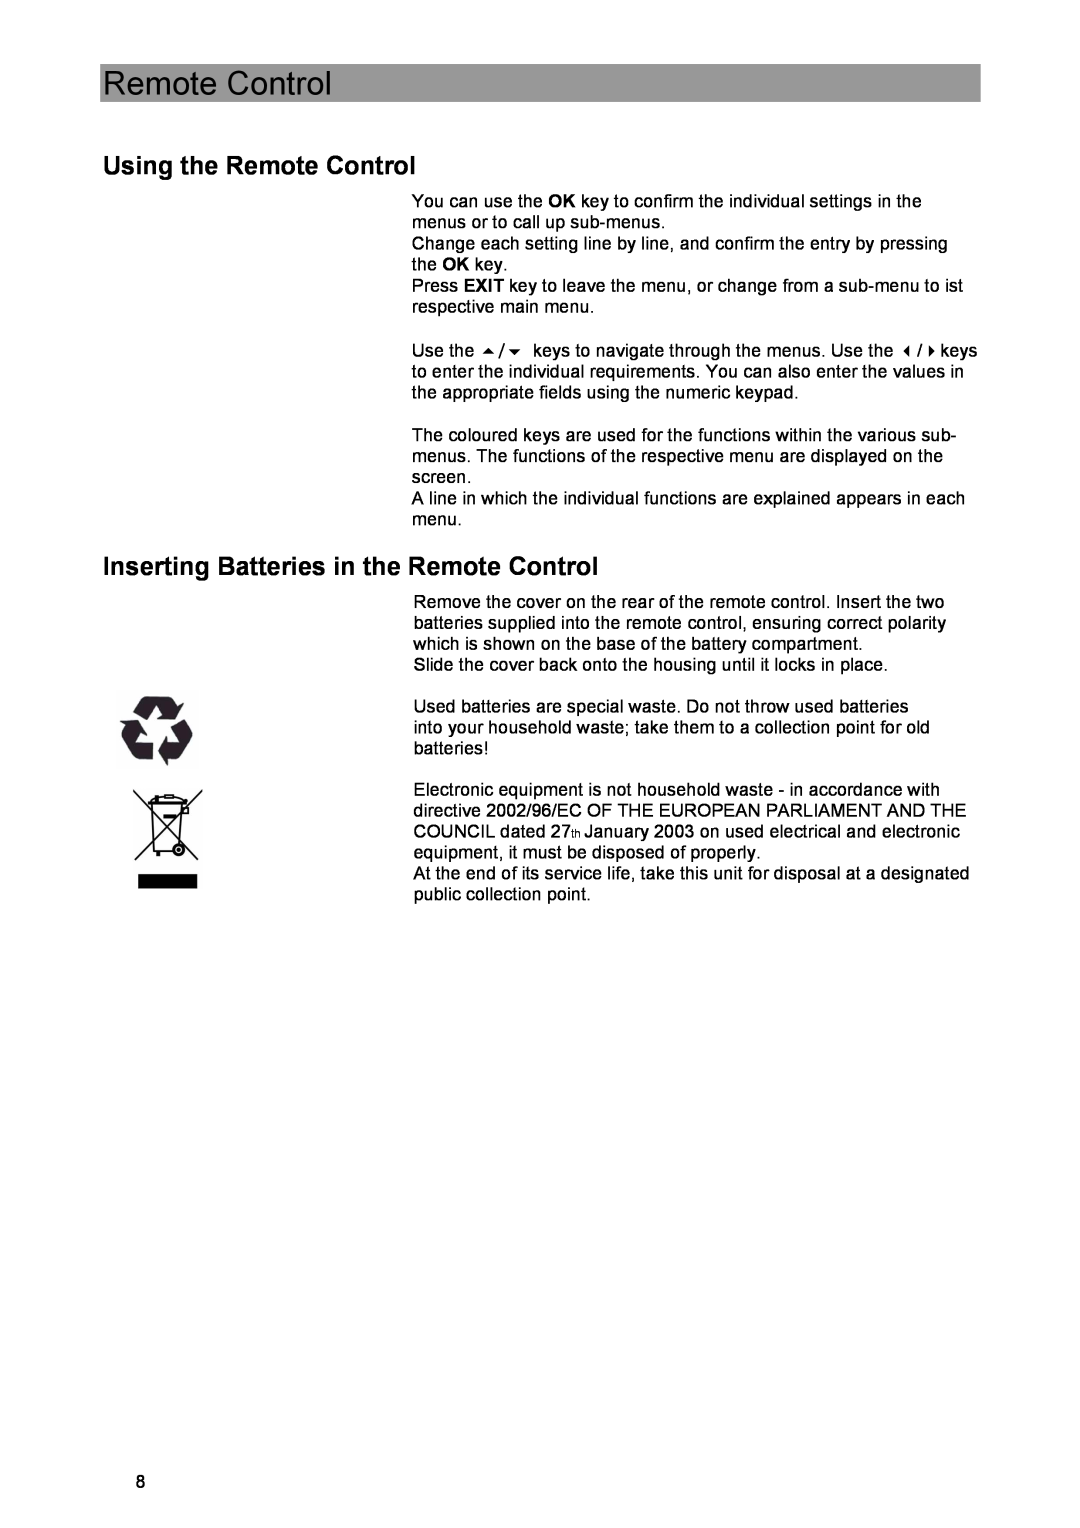 Kathrein UFE 371/S manual Using the Remote Control, Inserting Batteries in the Remote Control 